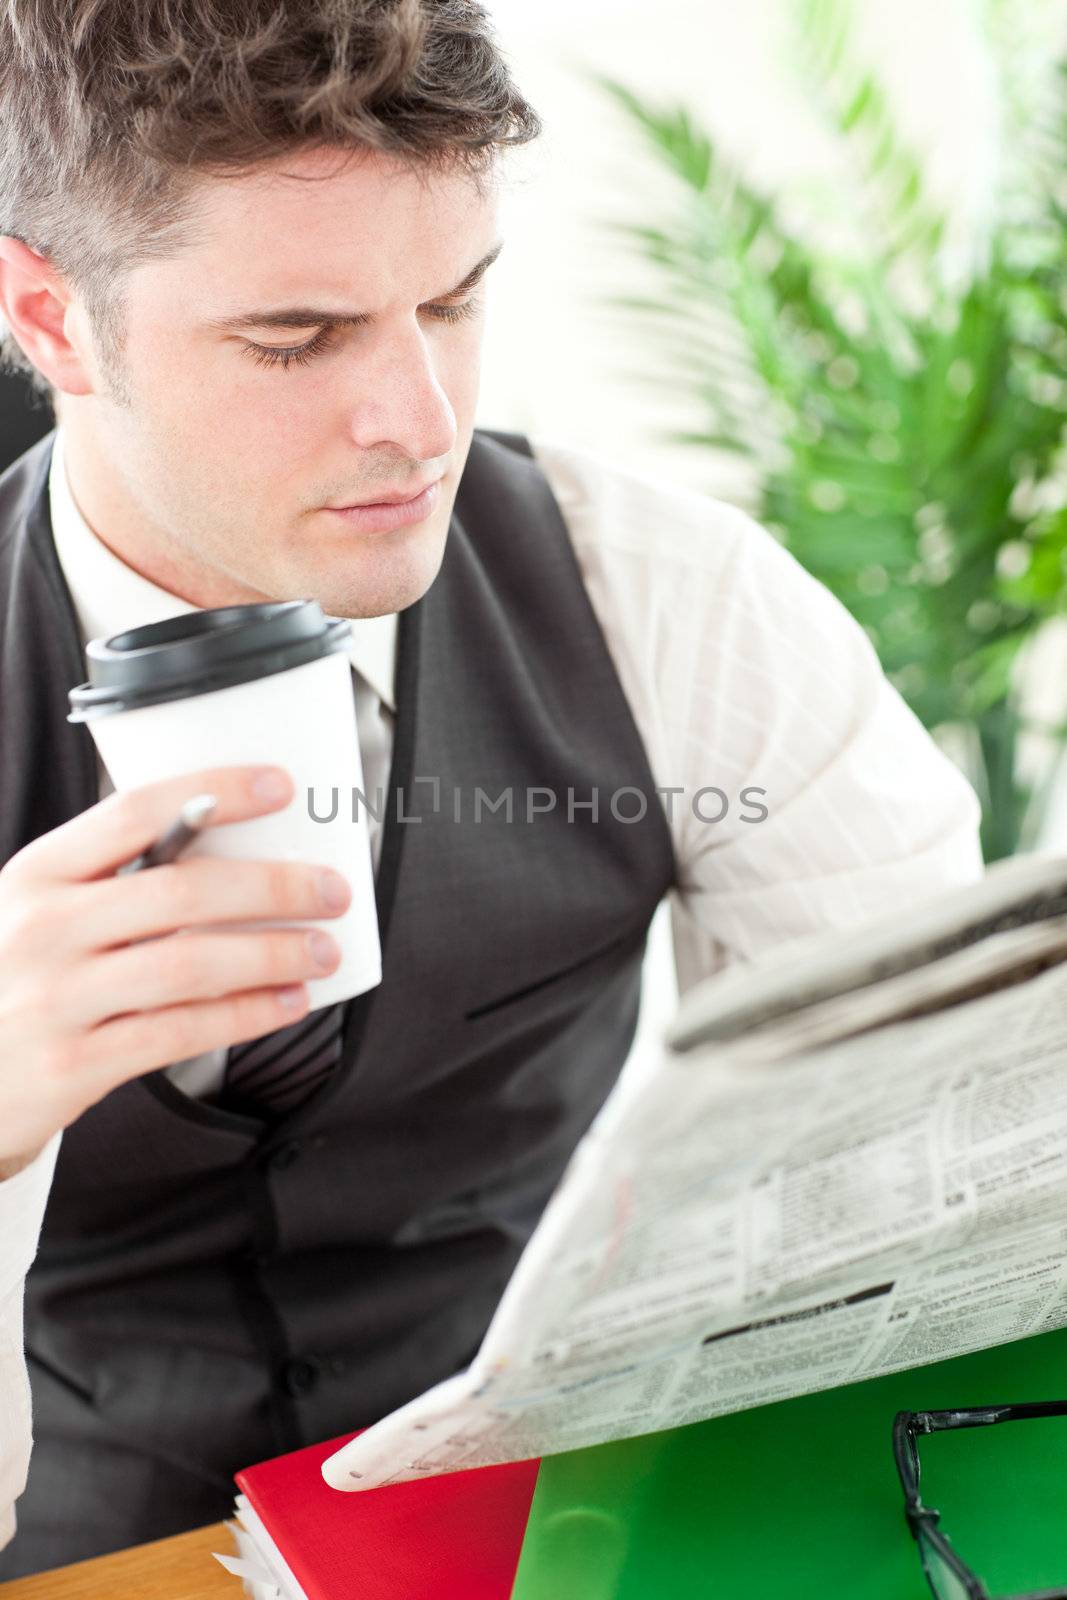 Charismatic businessman drinking a coffee while reading a newspaper sitting at his desk